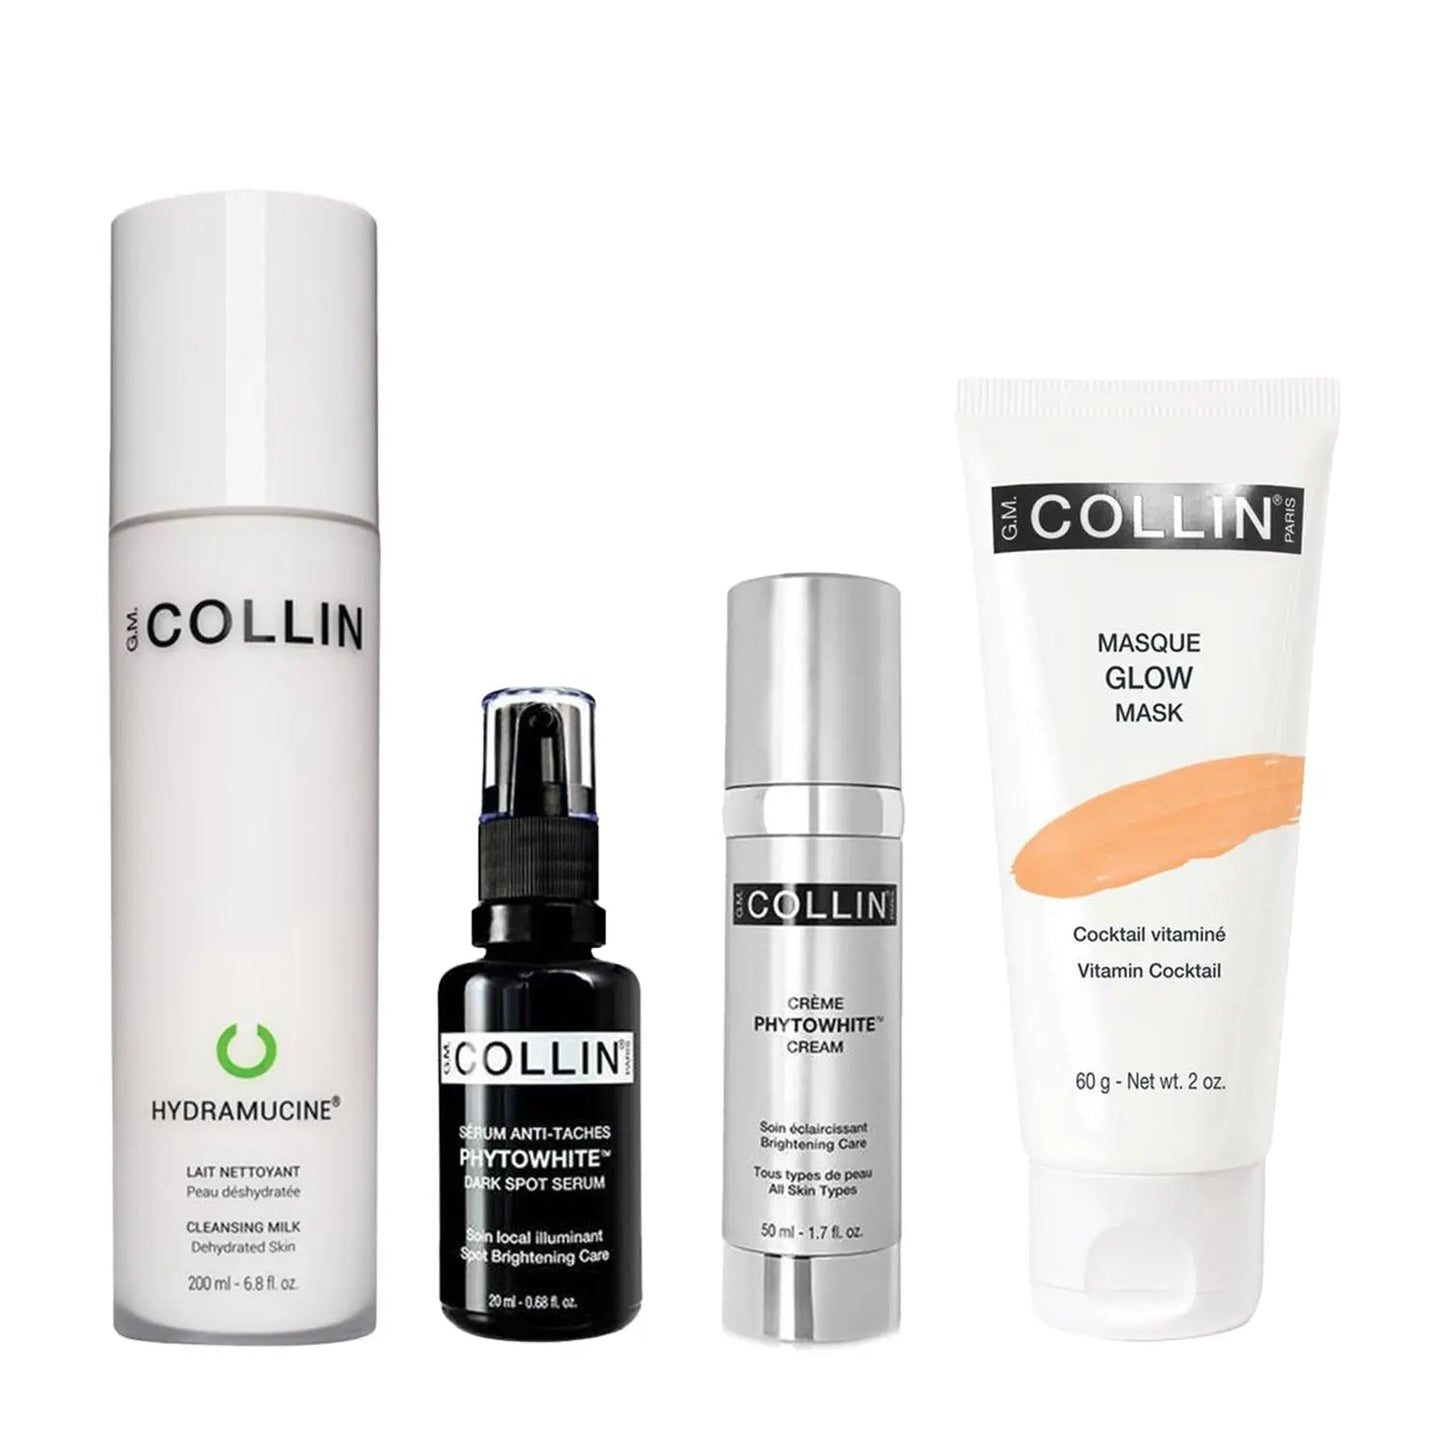 G.M Collin Pigment Control Bundle For Dry Skin